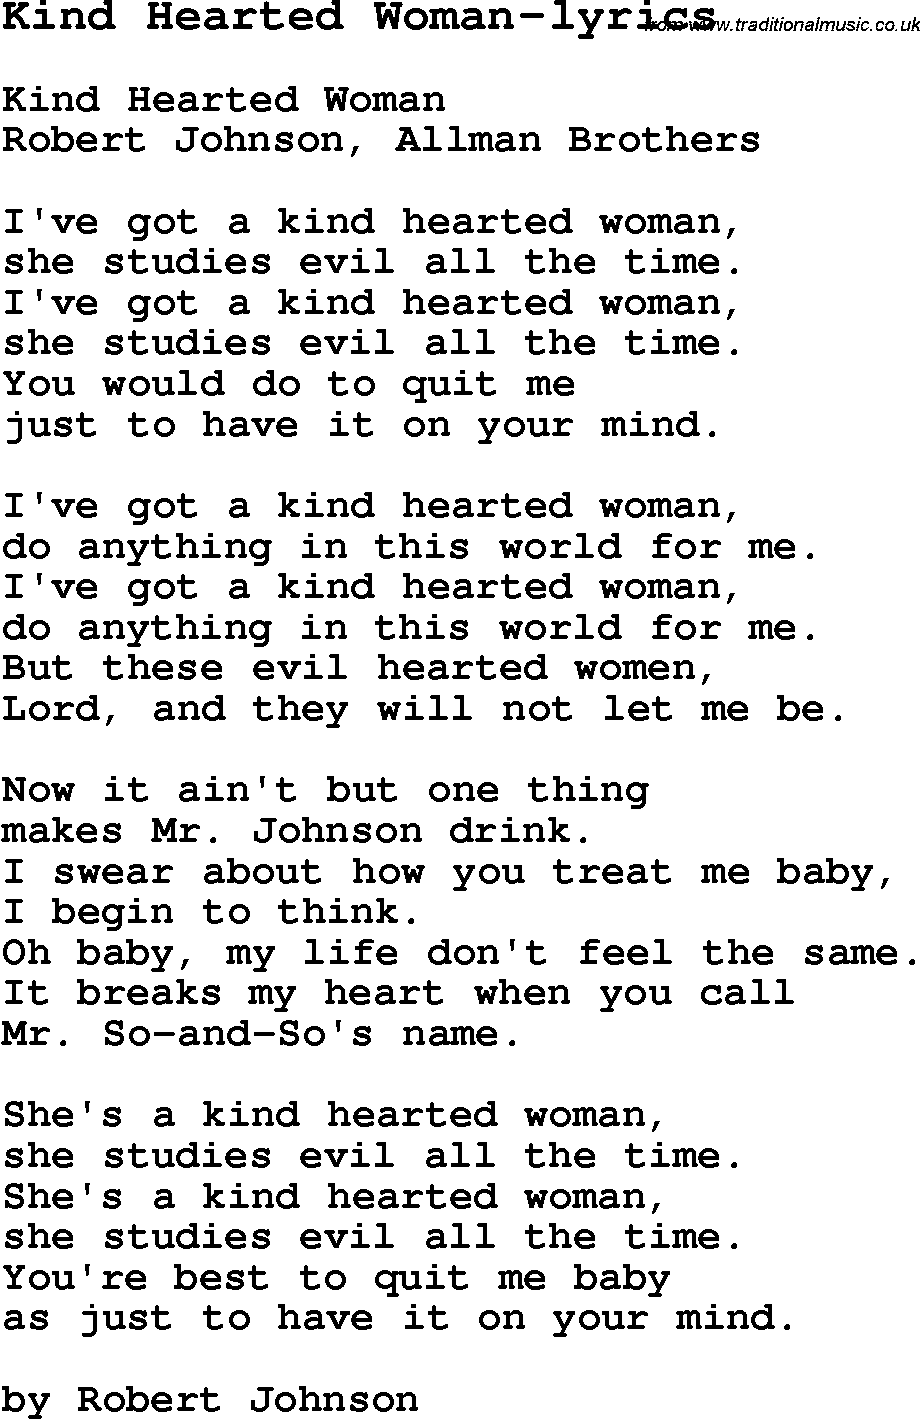 Blues Guitar Song, lyrics, chords, tablature, playing hints for Kind Hearted Woman-lyrics